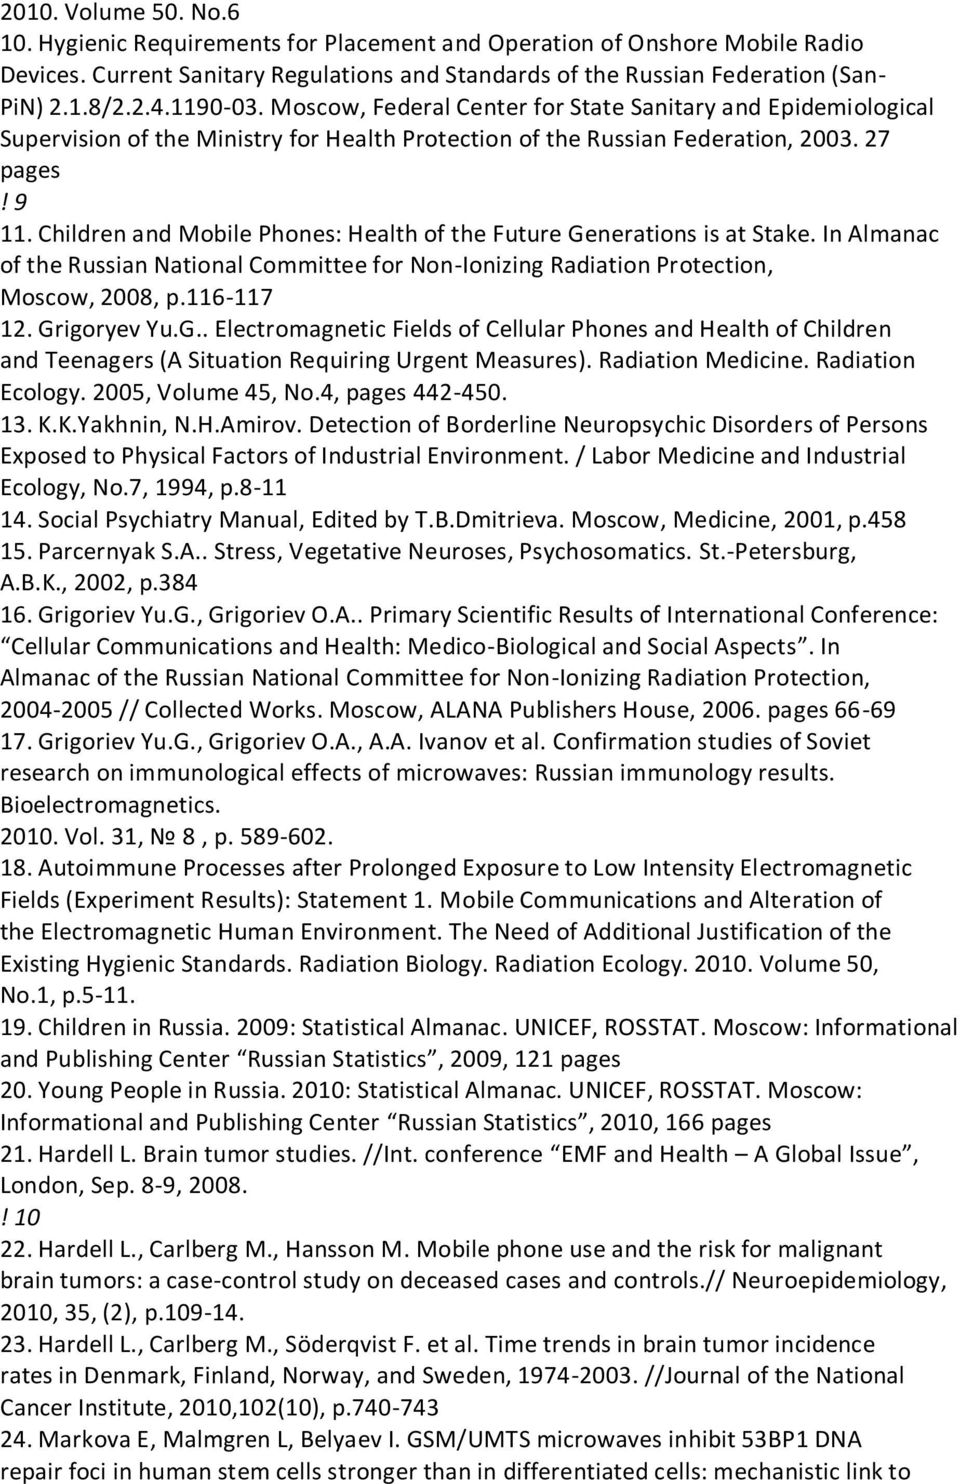 Children and Mobile Phones: Health of the Future Generations is at Stake. In Almanac of the Russian National Committee for Non-Ionizing Radiation Protection, Moscow, 2008, p.116-117 12. Grigoryev Yu.